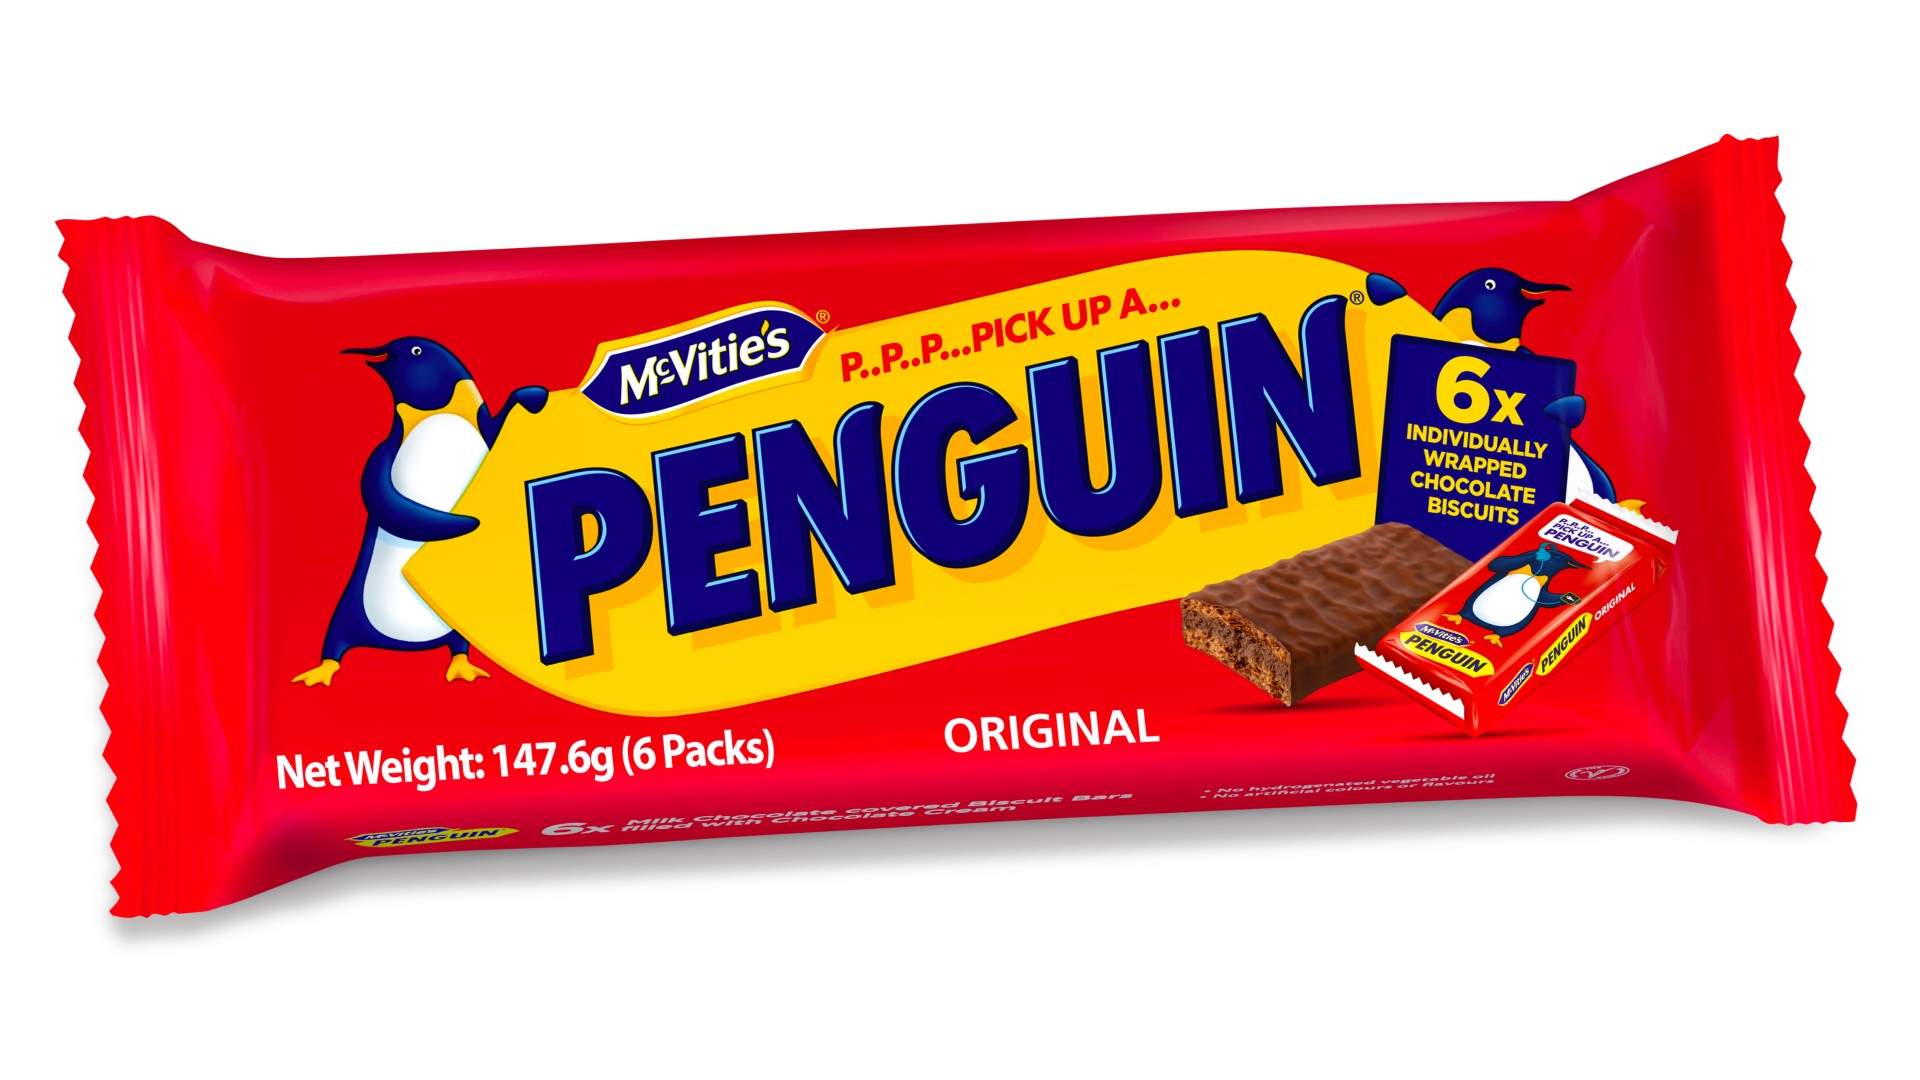 Britain's Iconic Penguin Chocolate Biscuit Has Landed in Australian Supermarkets